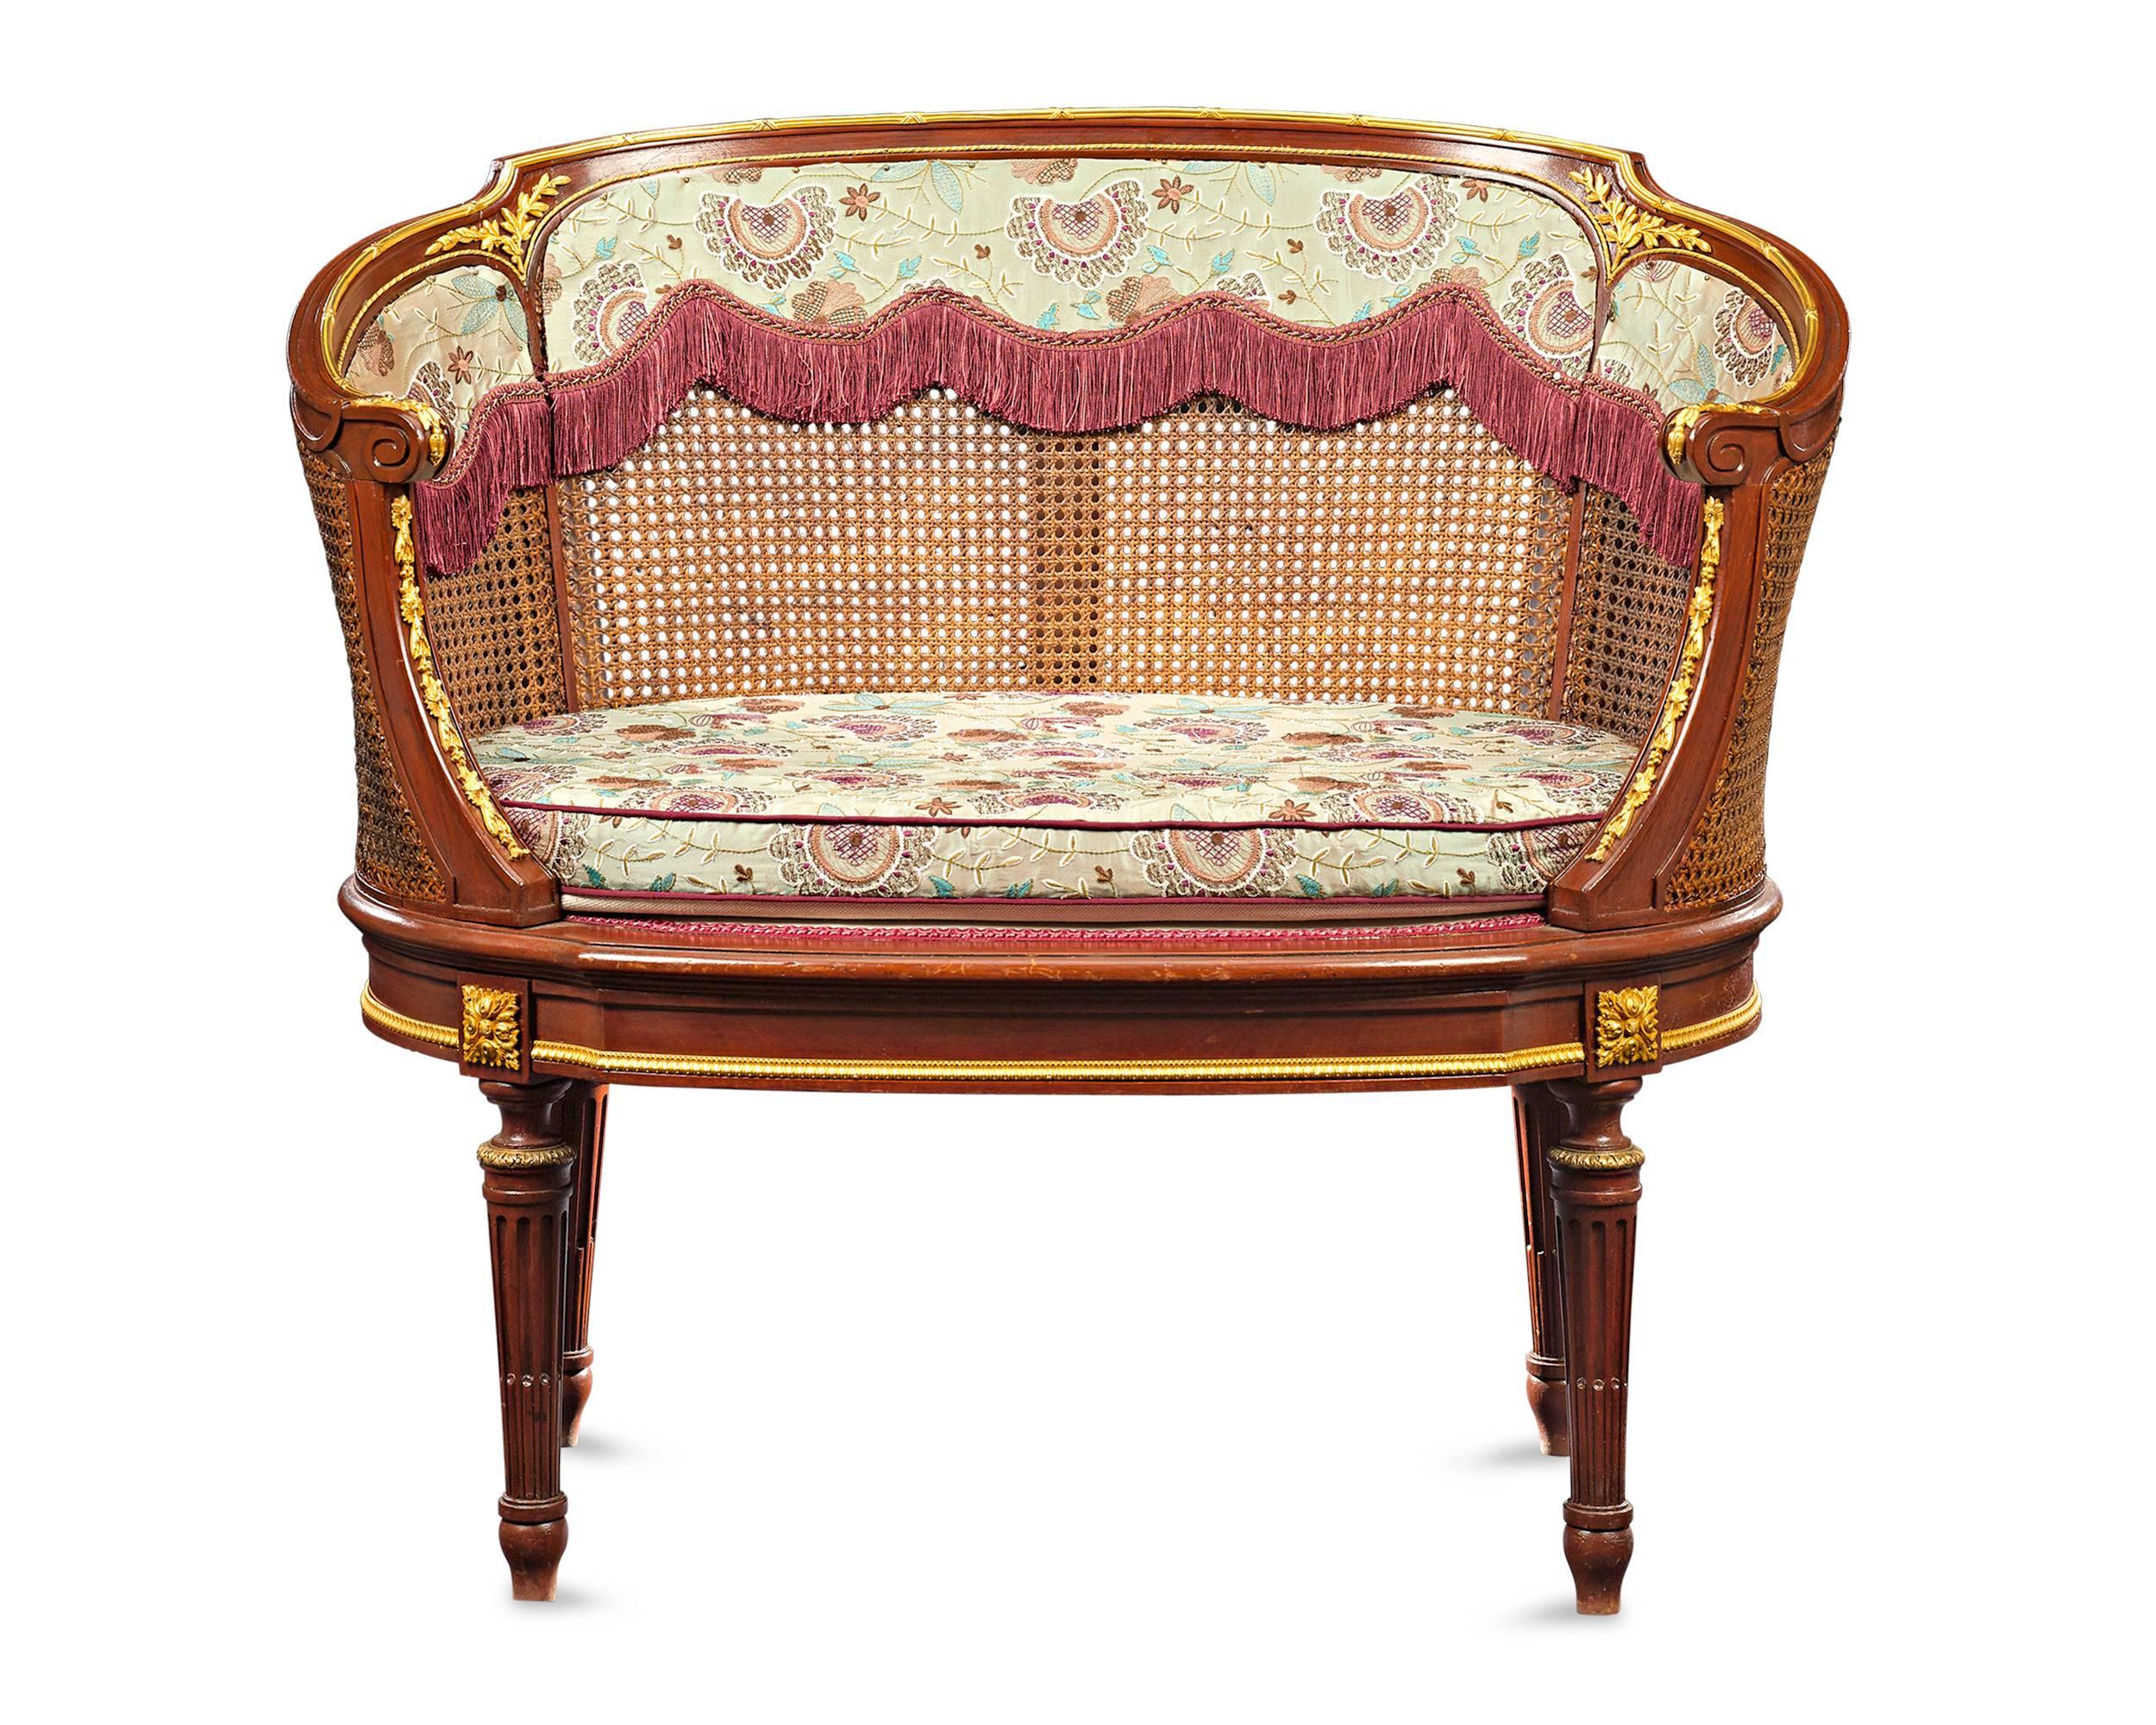 This exquisite pair of 19th century French settees captures the spirit of the Louis XV style. The versatile chairs are exquisitely crafted with gracefully curved, double caned seat backs, while bronze ormolu accents add a hint of luxury to the